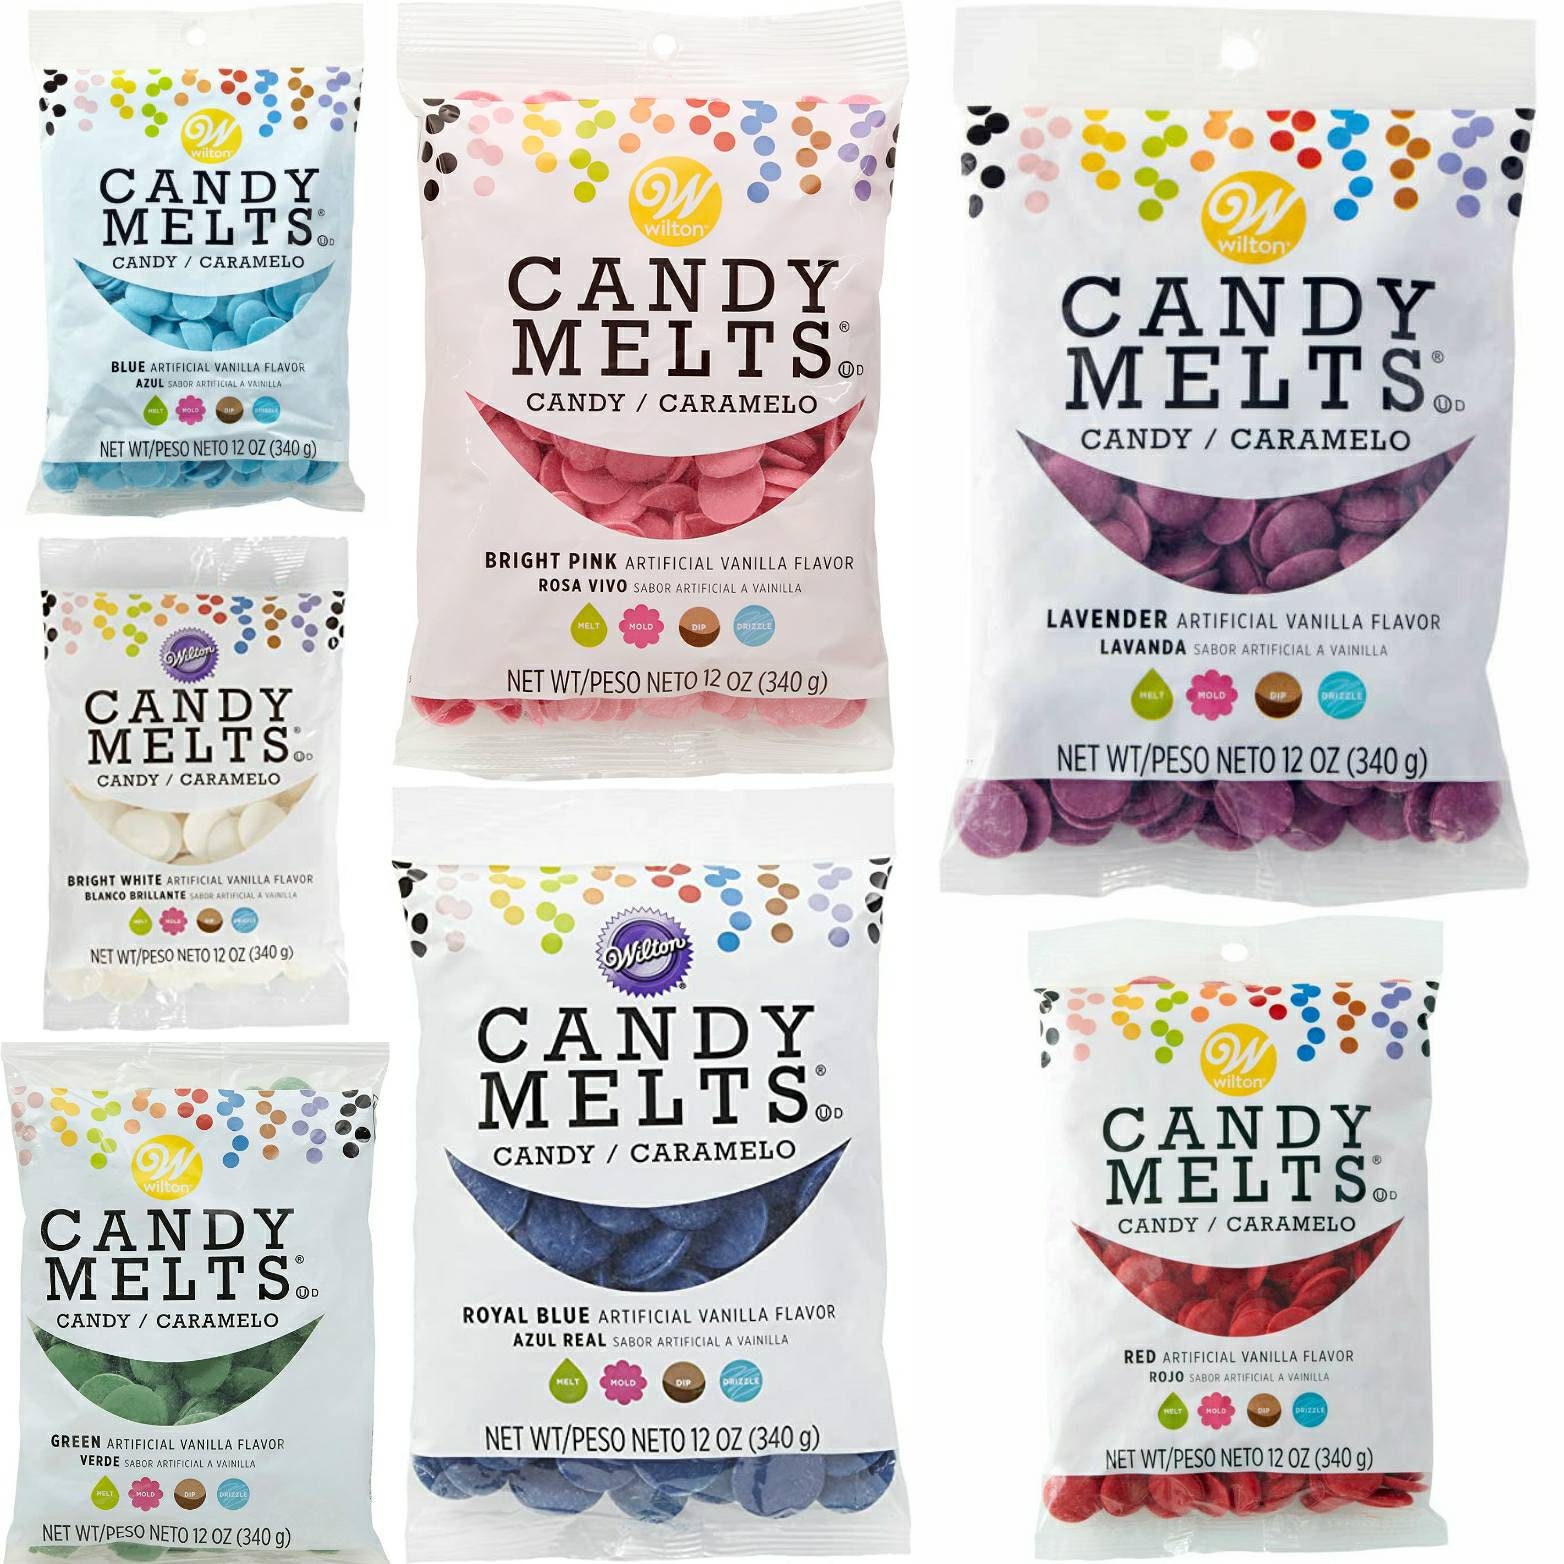 Save on Wilton Candy Melts Bright White Vanilla Flavored Order